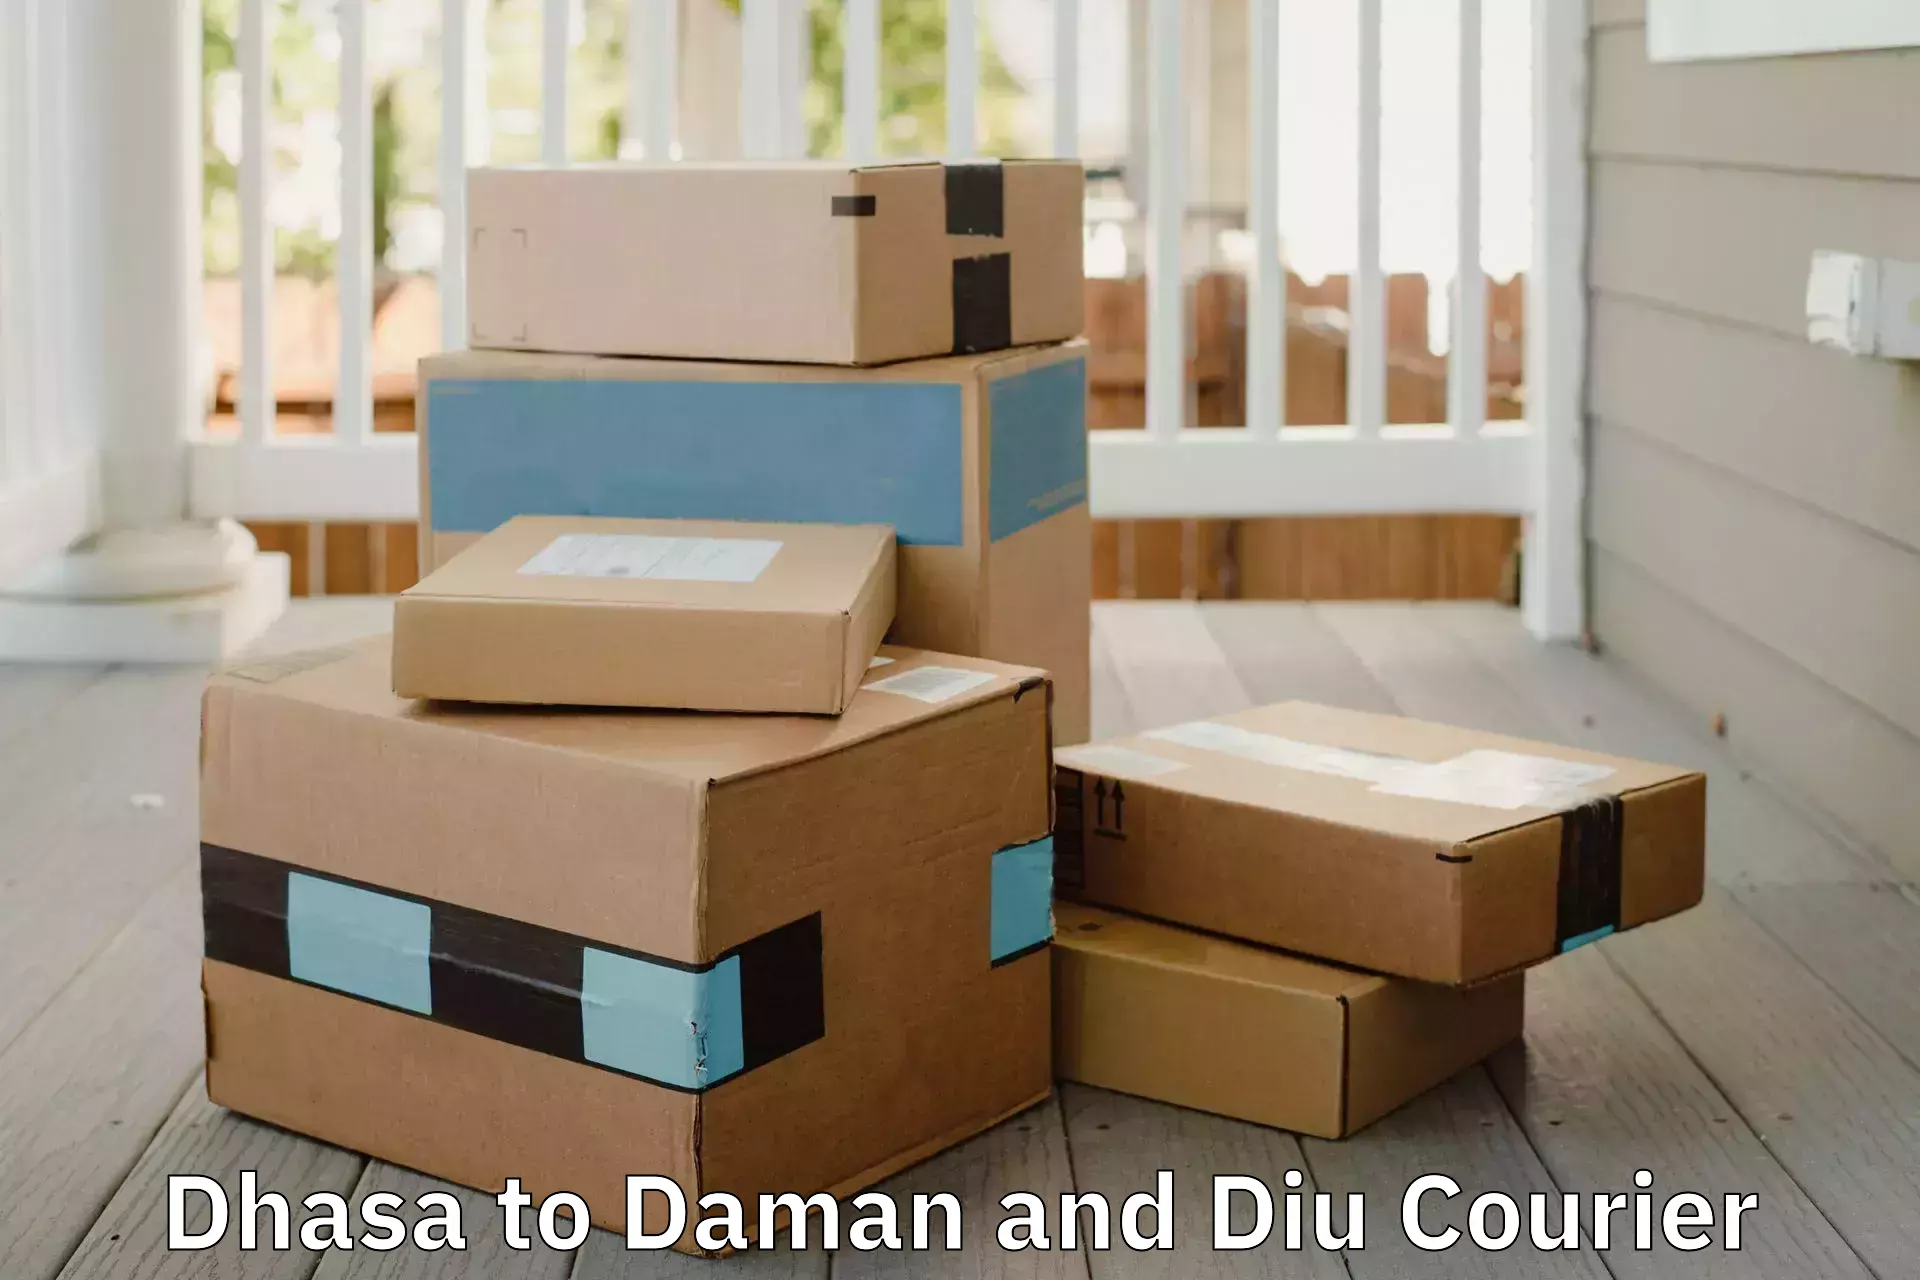 Moving and handling services Dhasa to Daman and Diu